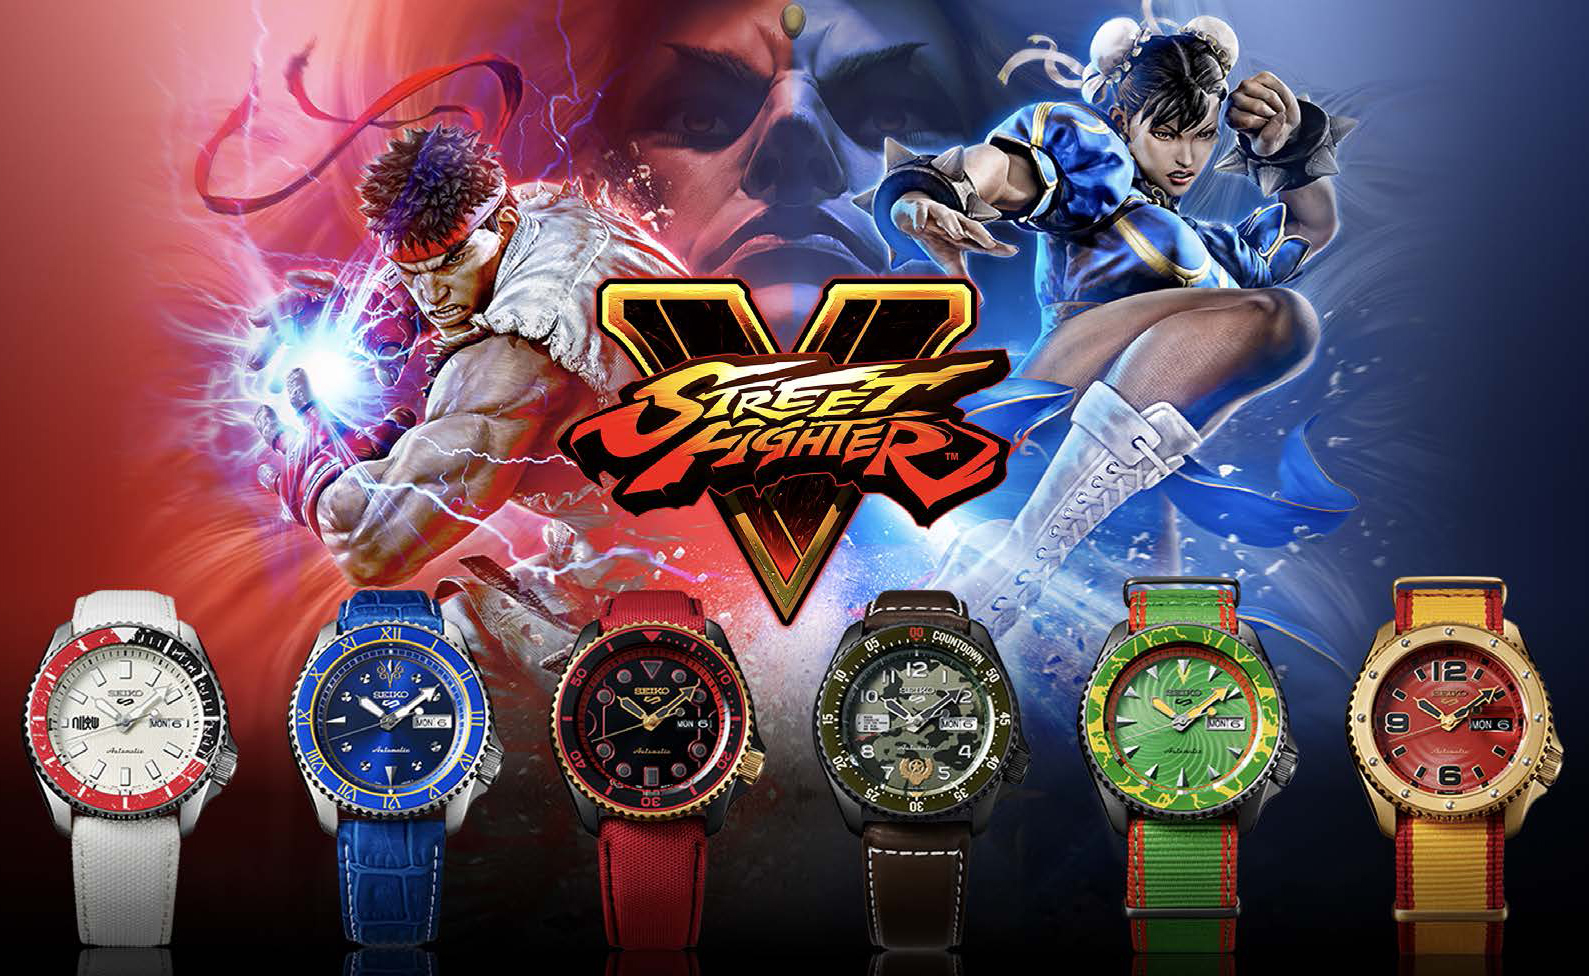 Seiko 5 sports street fighter v limited edition group